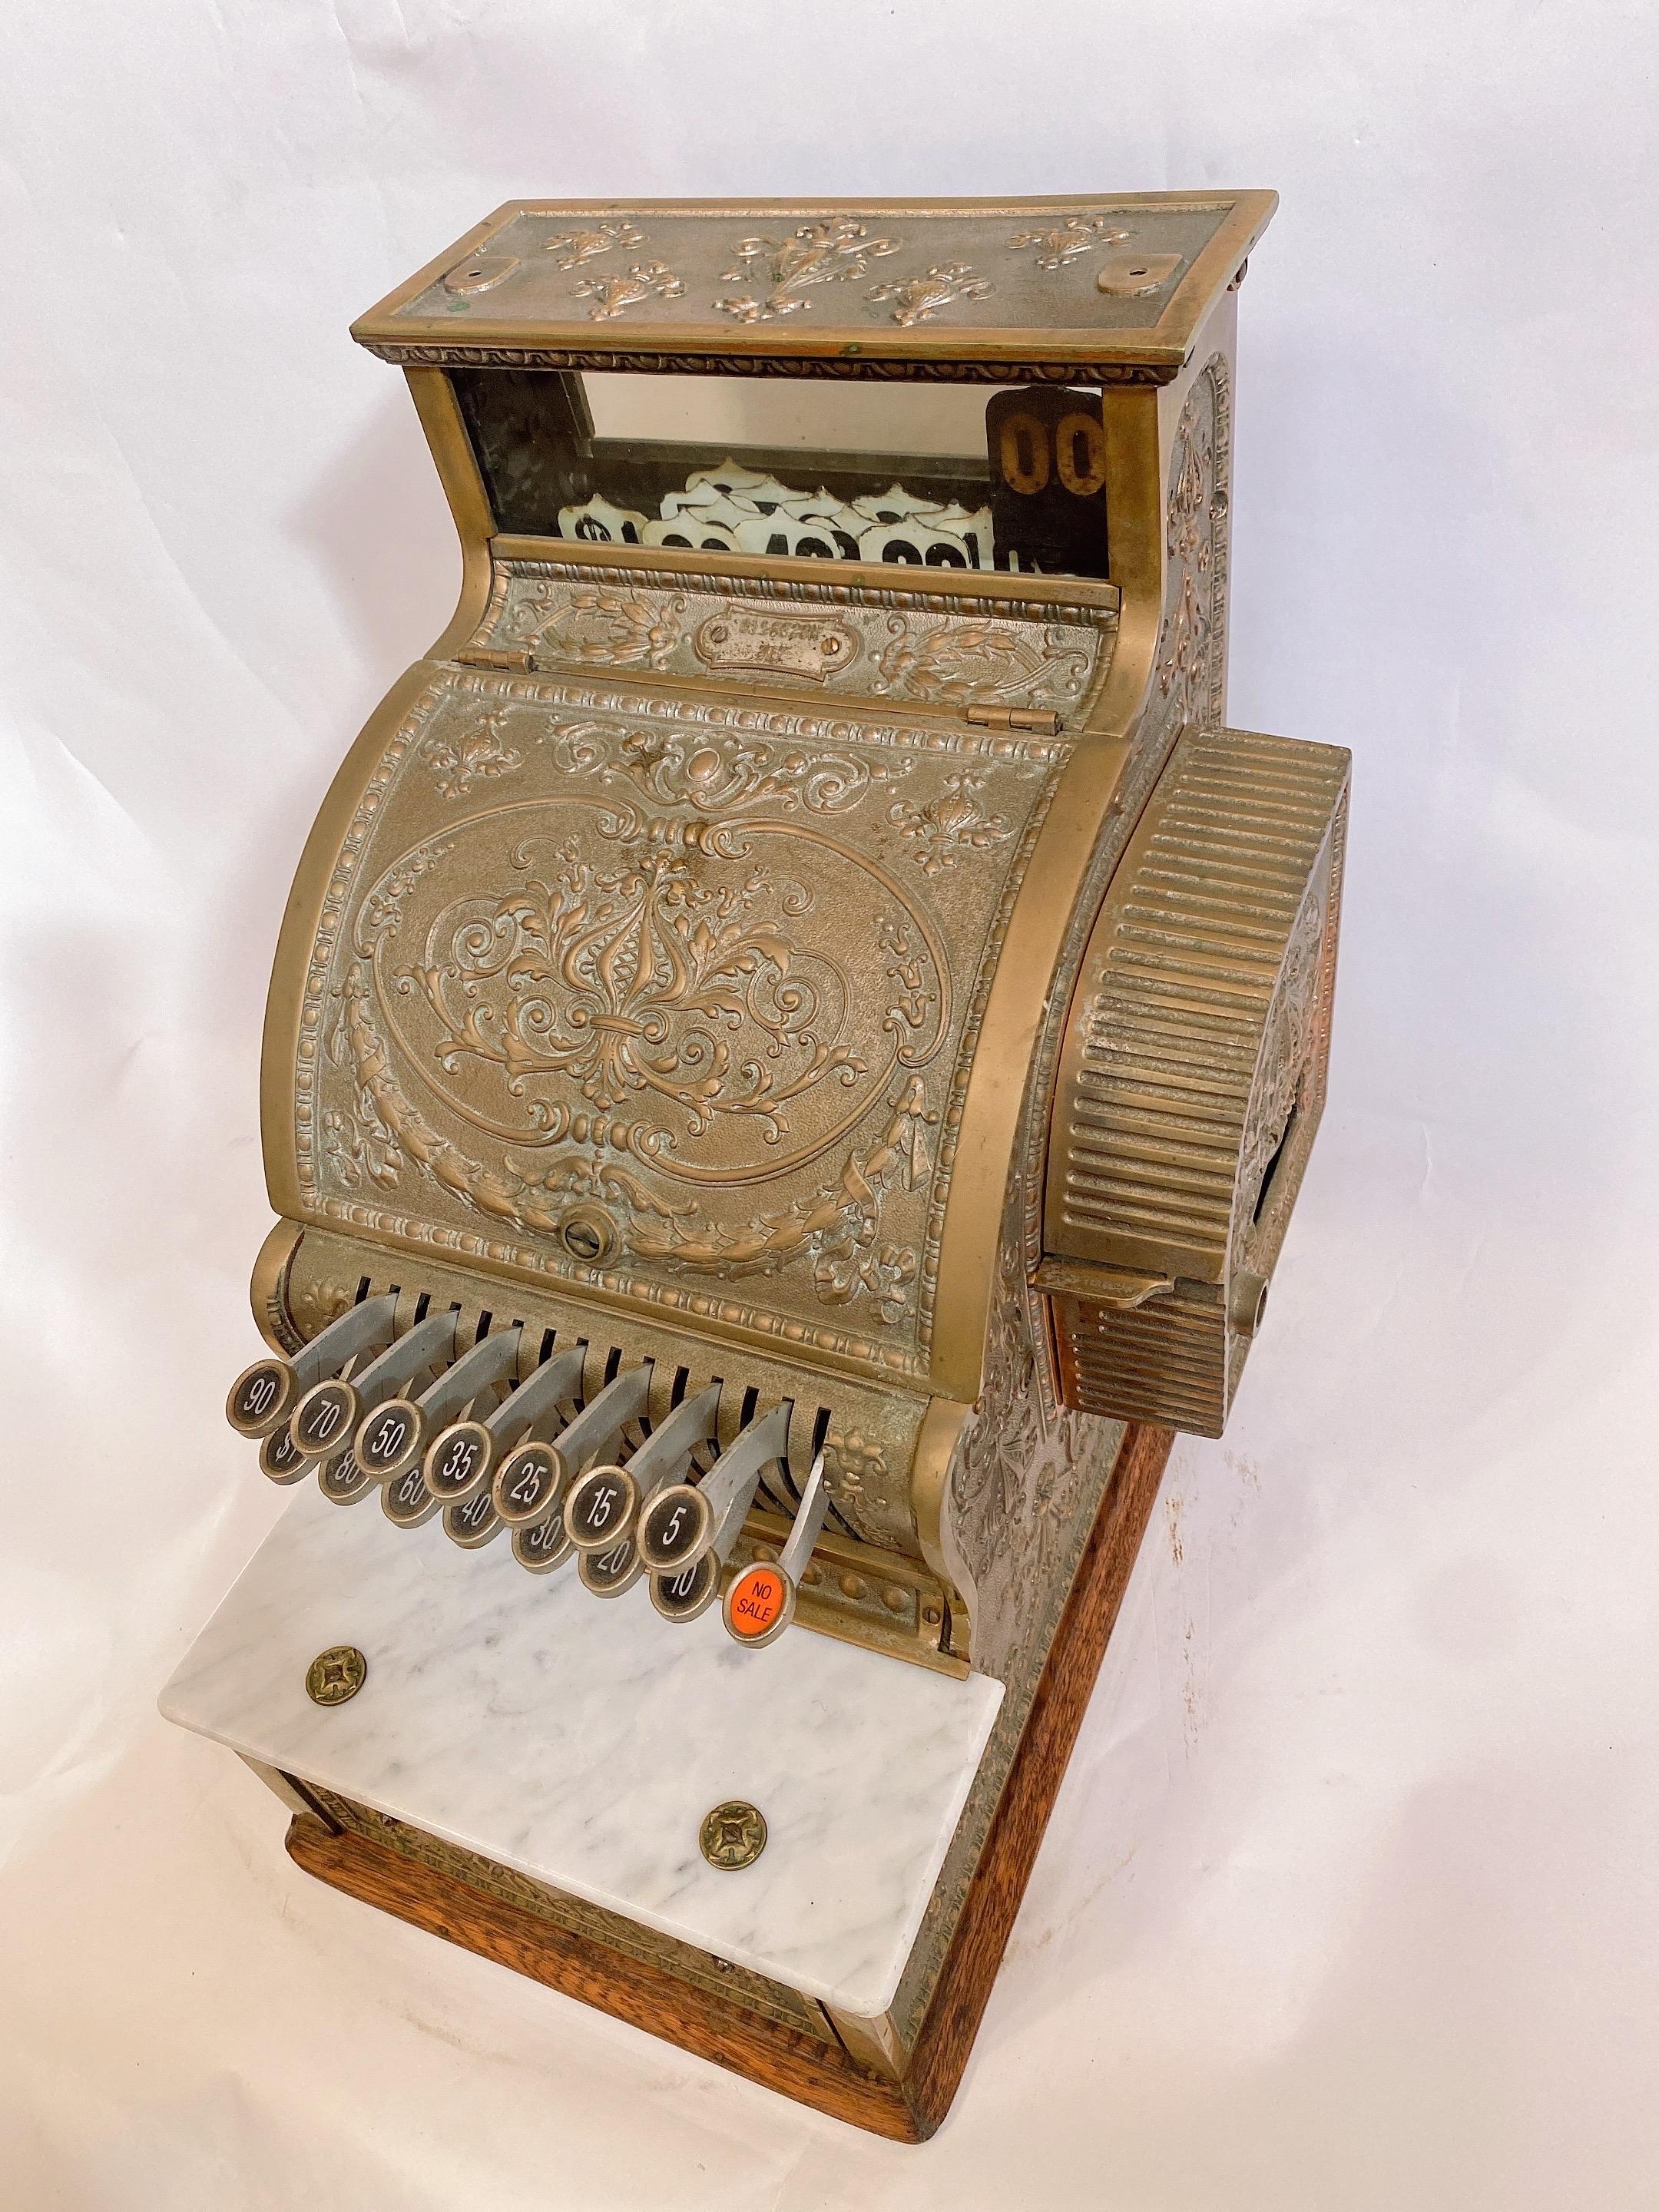 Other Early 1900s National Brass Cash Register